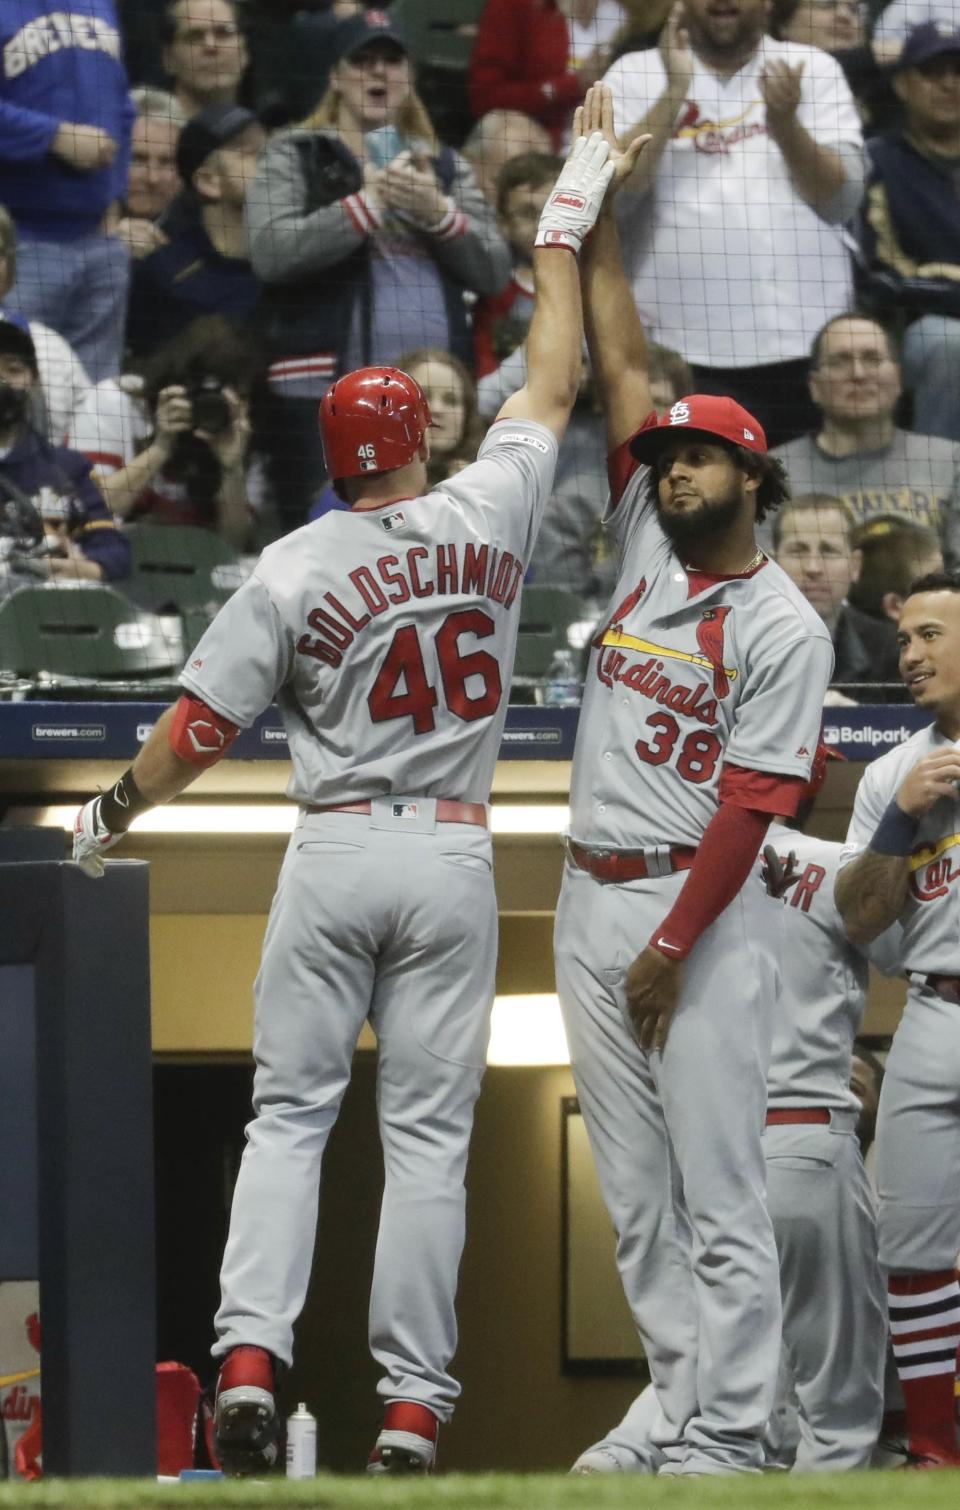 St. Louis Cardinals' Paul Goldschmidt is congratulated by Jose Martinez after hitting a two-run home run during the first inning of a baseball game against the Milwaukee Brewers Friday, March 29, 2019, in Milwaukee. (AP Photo/Morry Gash)